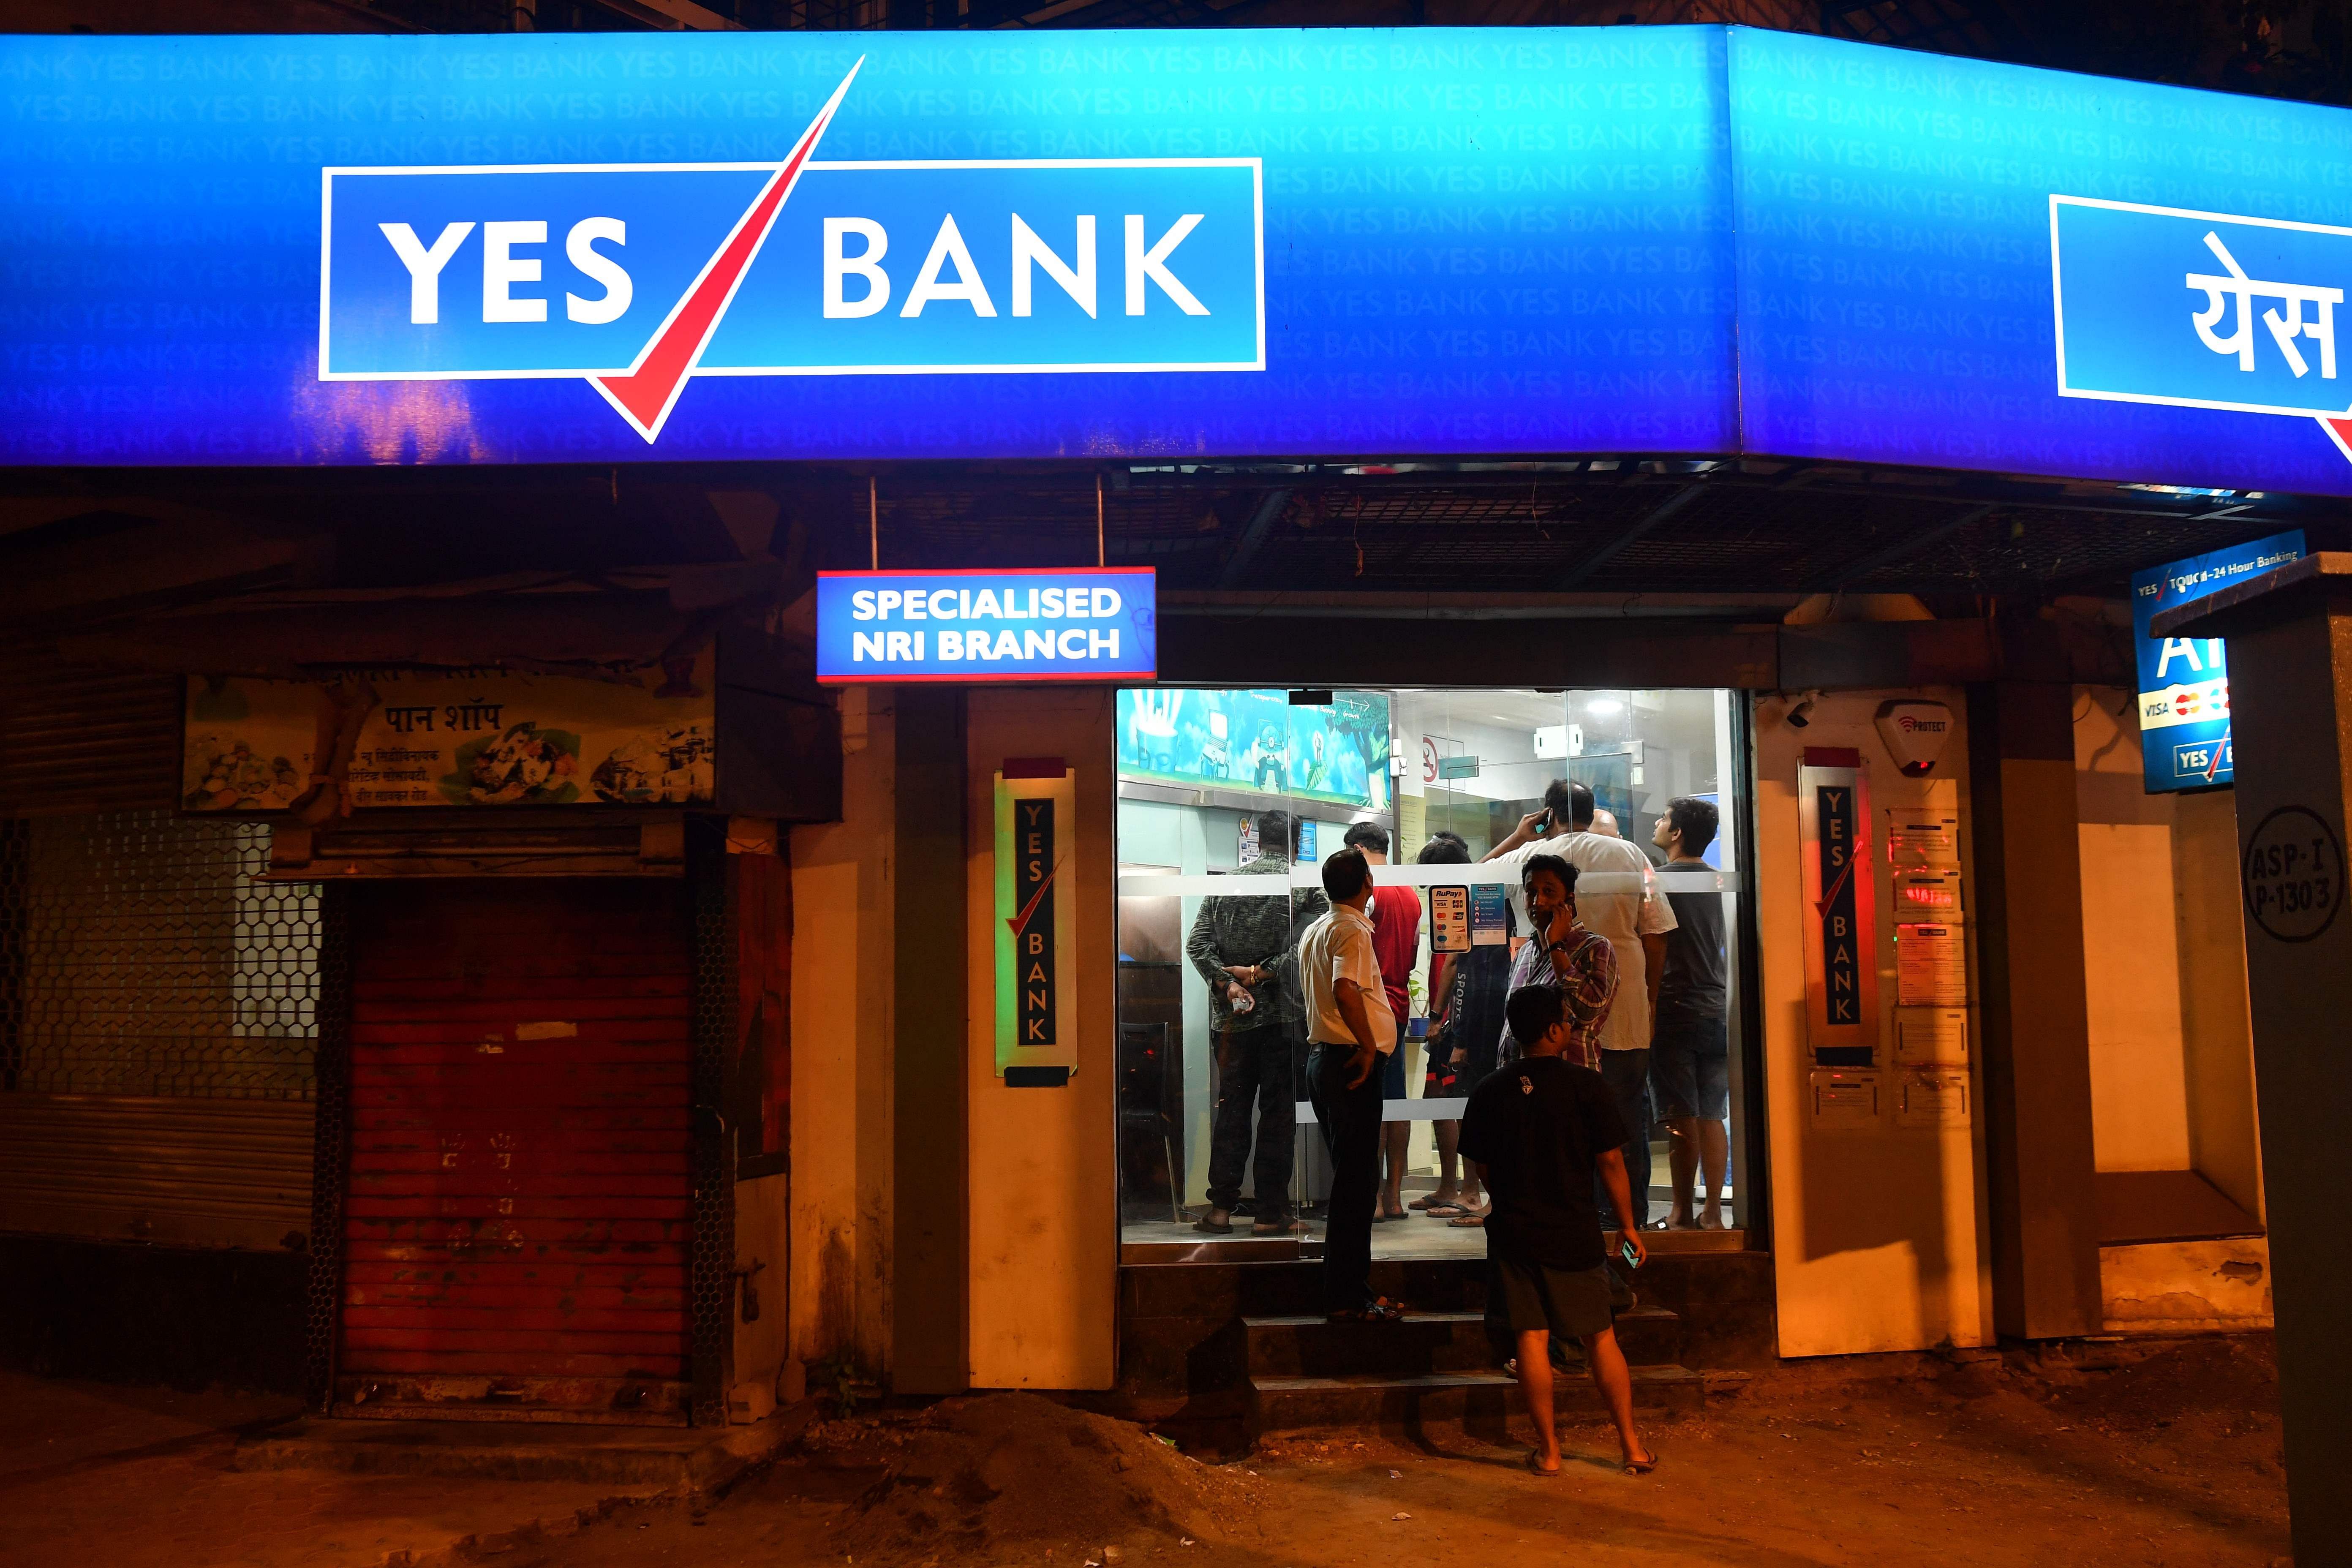 Customers of Yes Bank queue up to withdraw money from their accounts at an Automated Teller Machine (ATM) kiosk in Mumbai on March 5, 2020. (Credit: AFP)